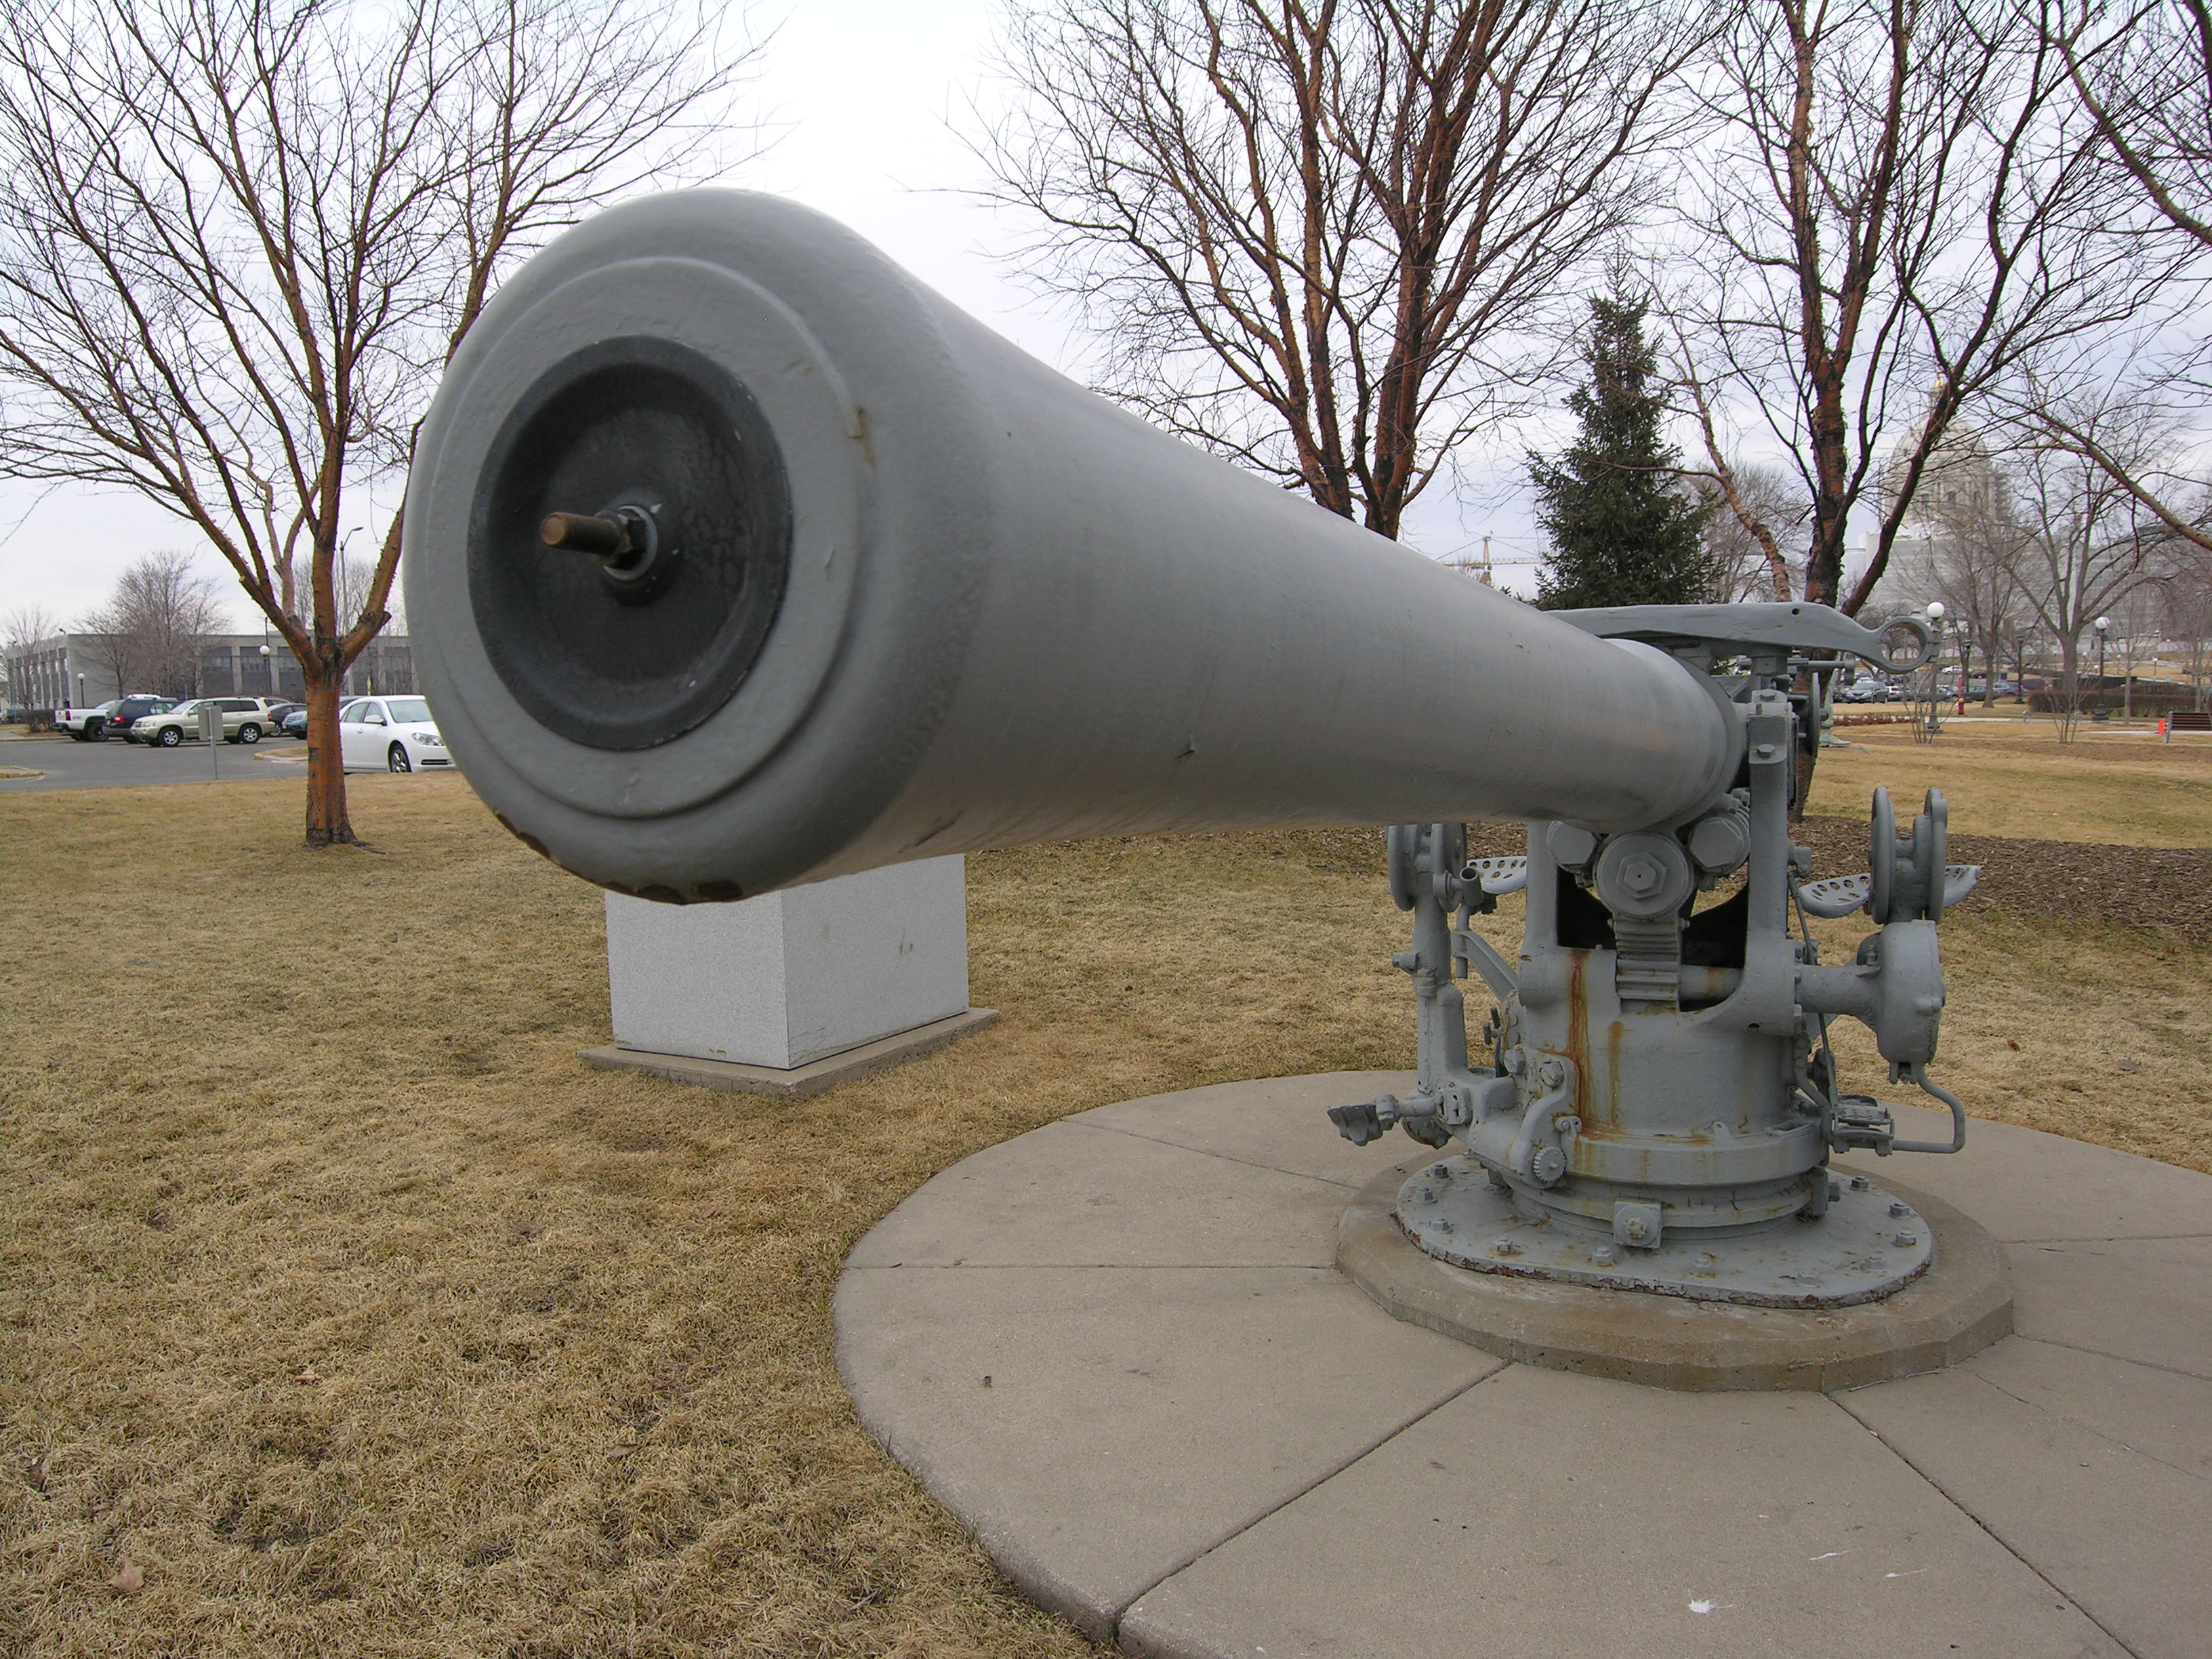 The USS Ward gun on the grounds of the Minnesota State Capitol, 2015. Credit: James P. Delgado